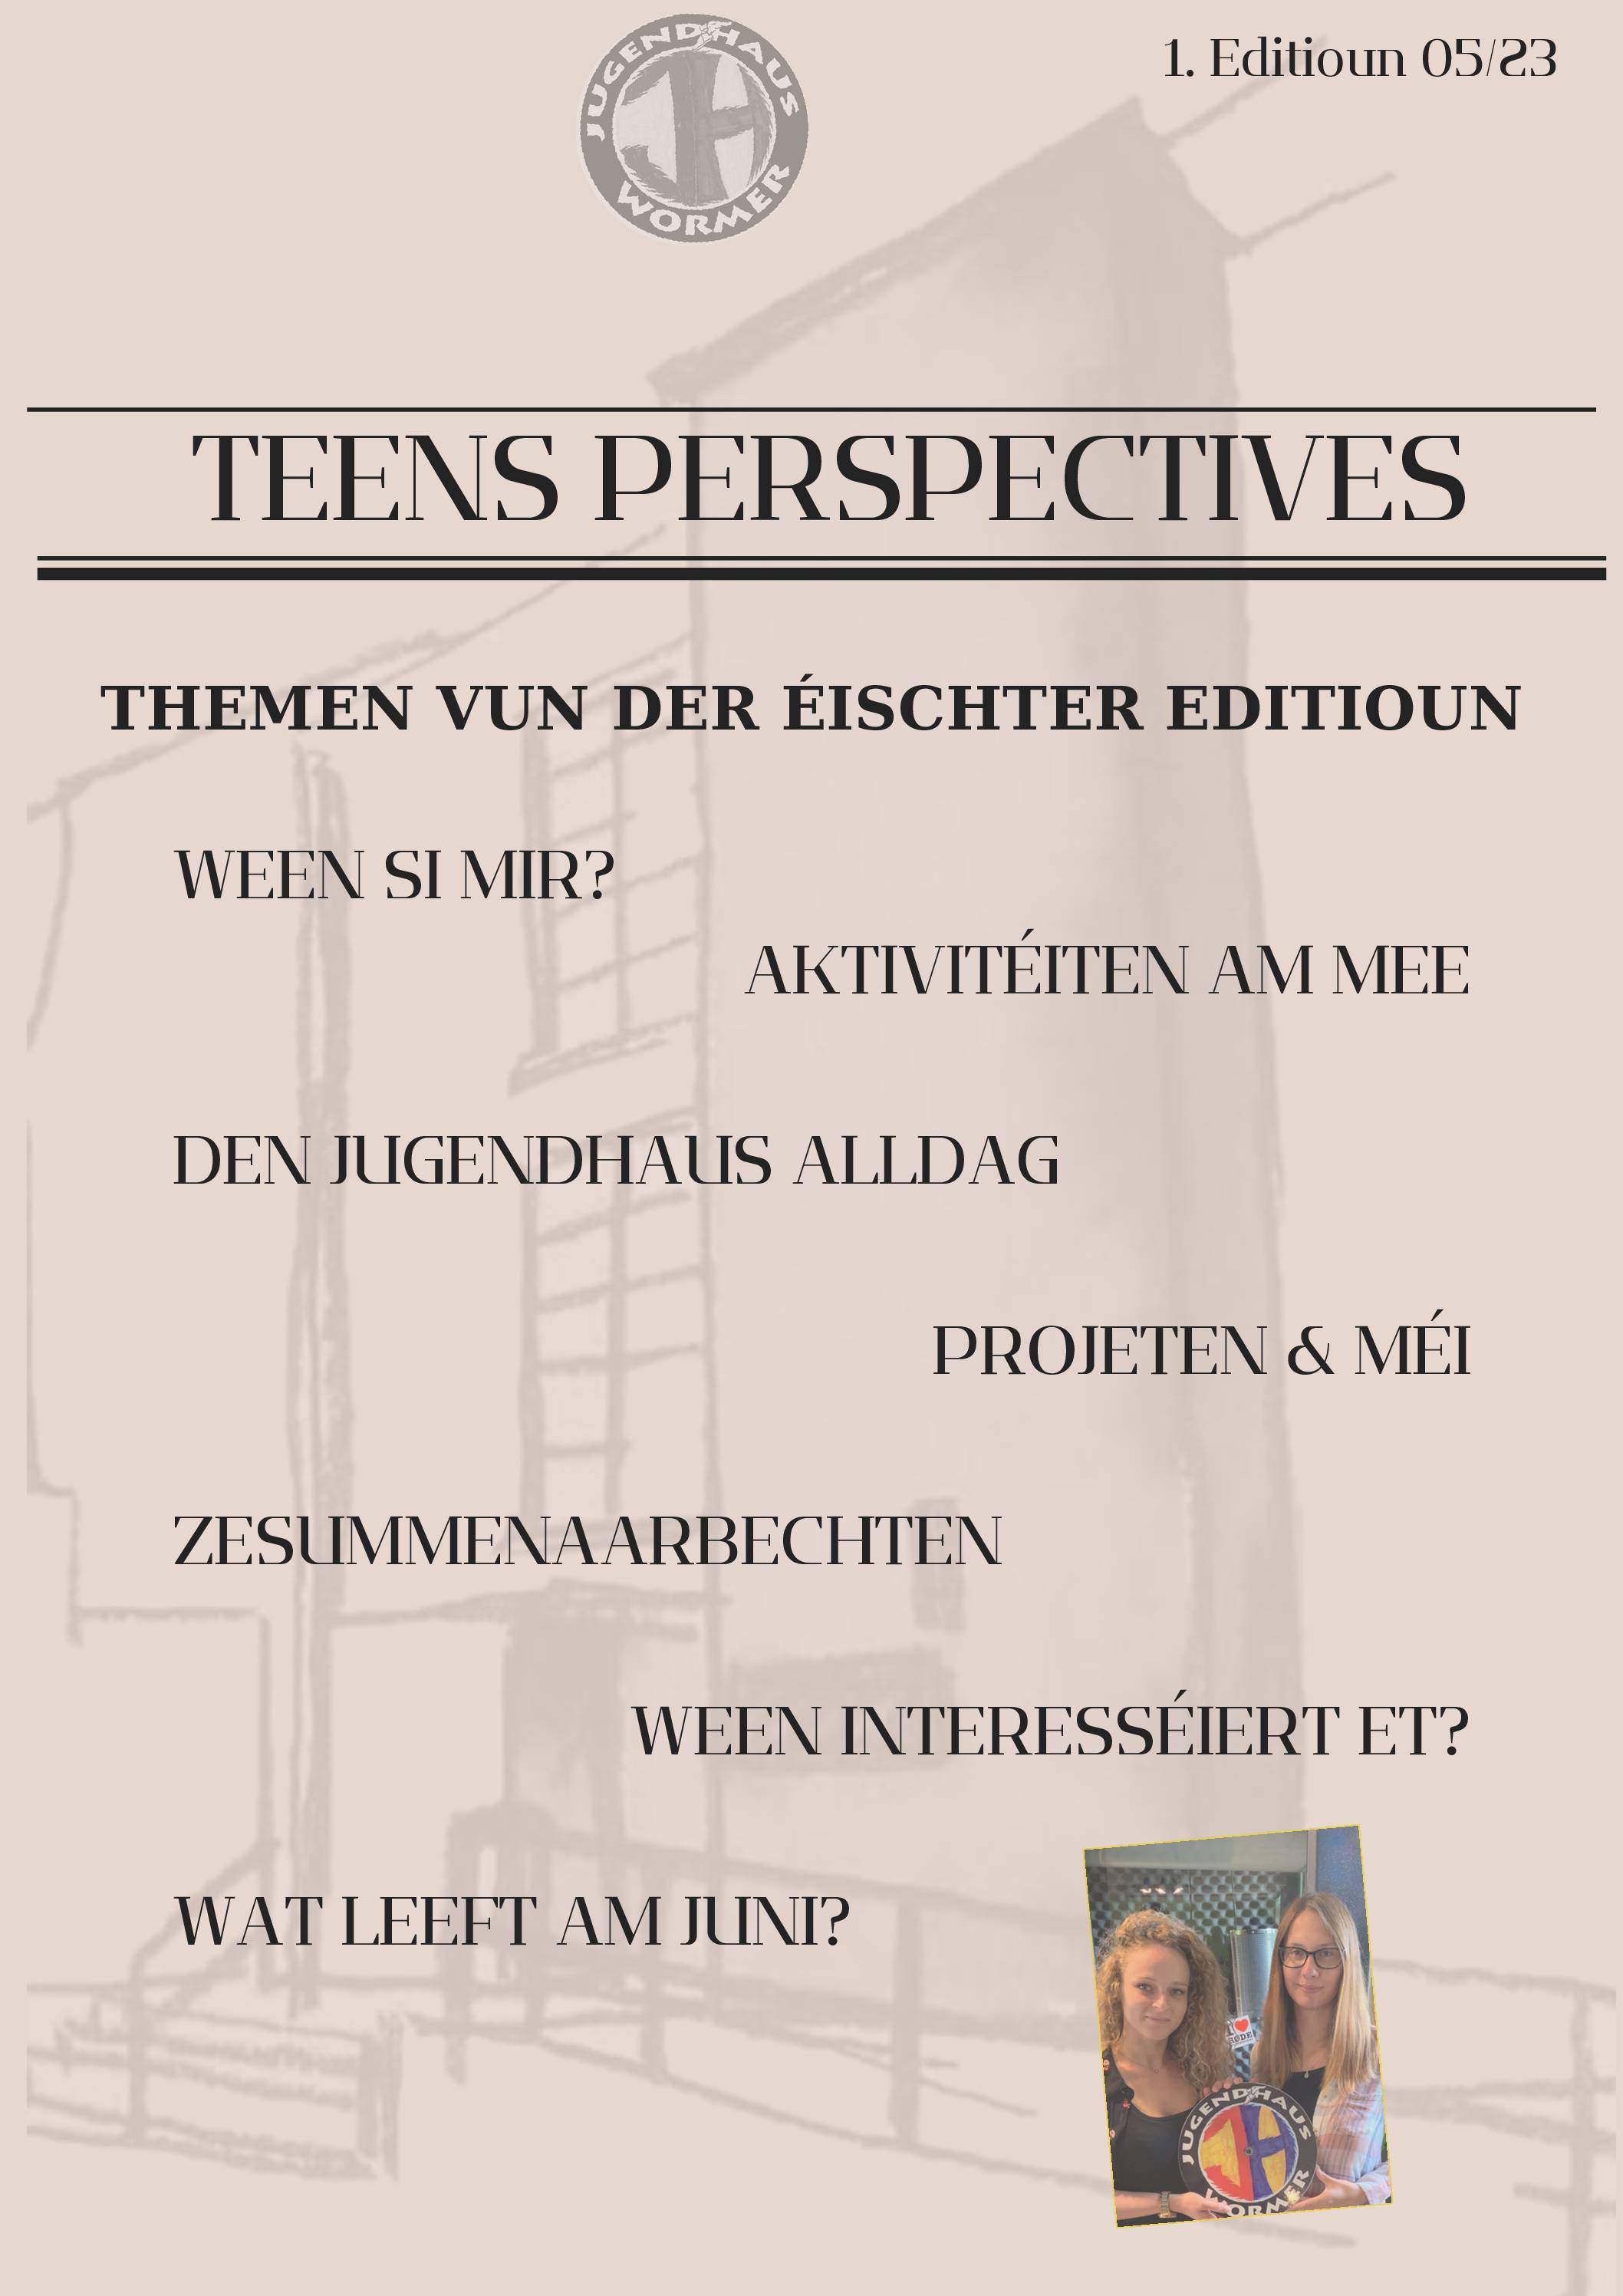 Teens Perspectives + Plan 5.23 version email